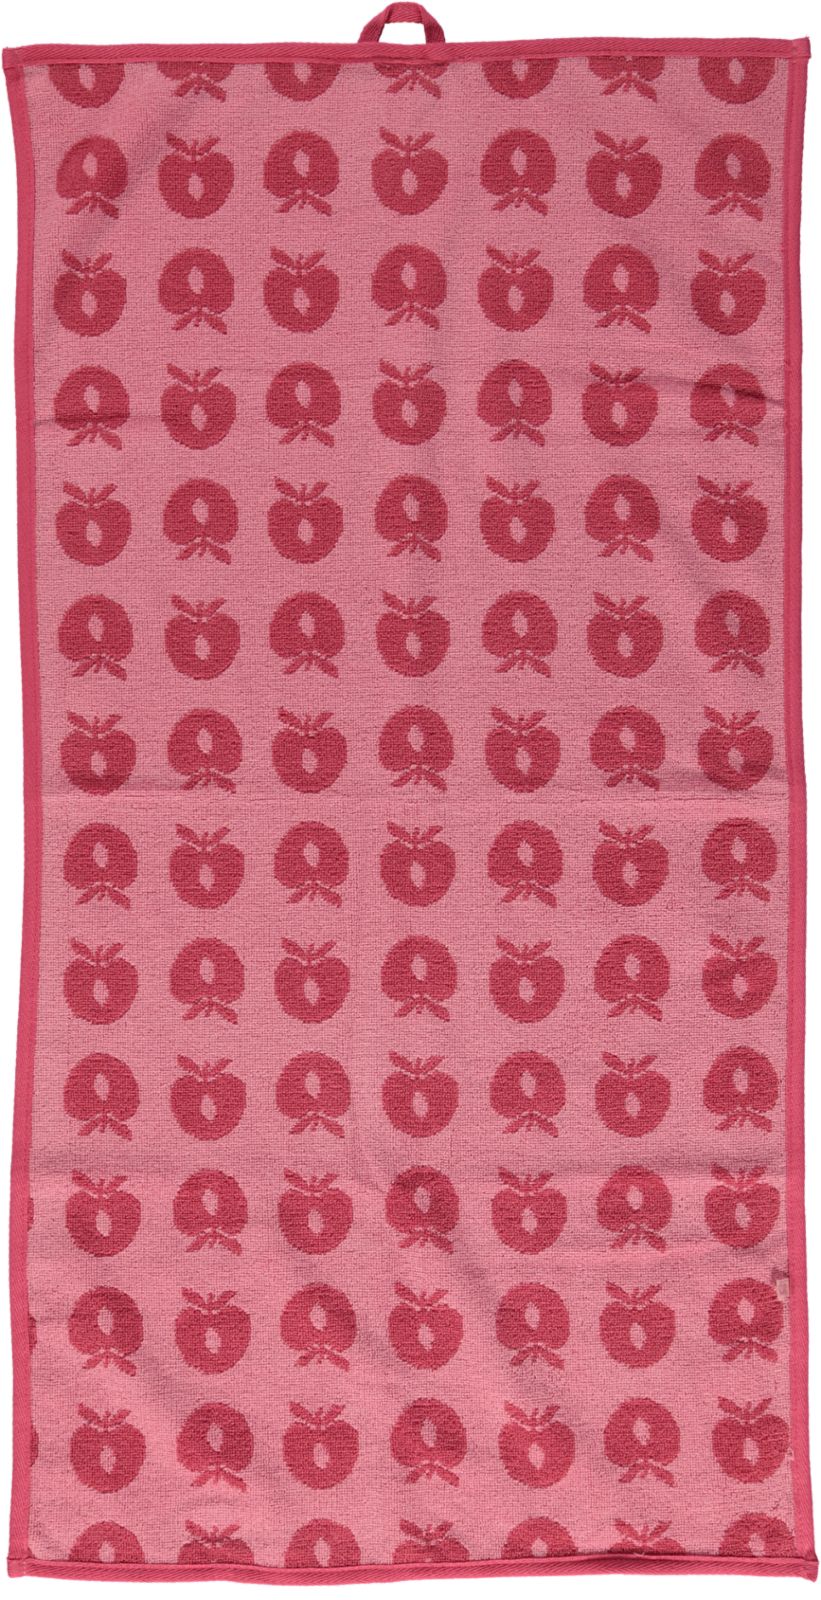 Towel 50x100 with Apples